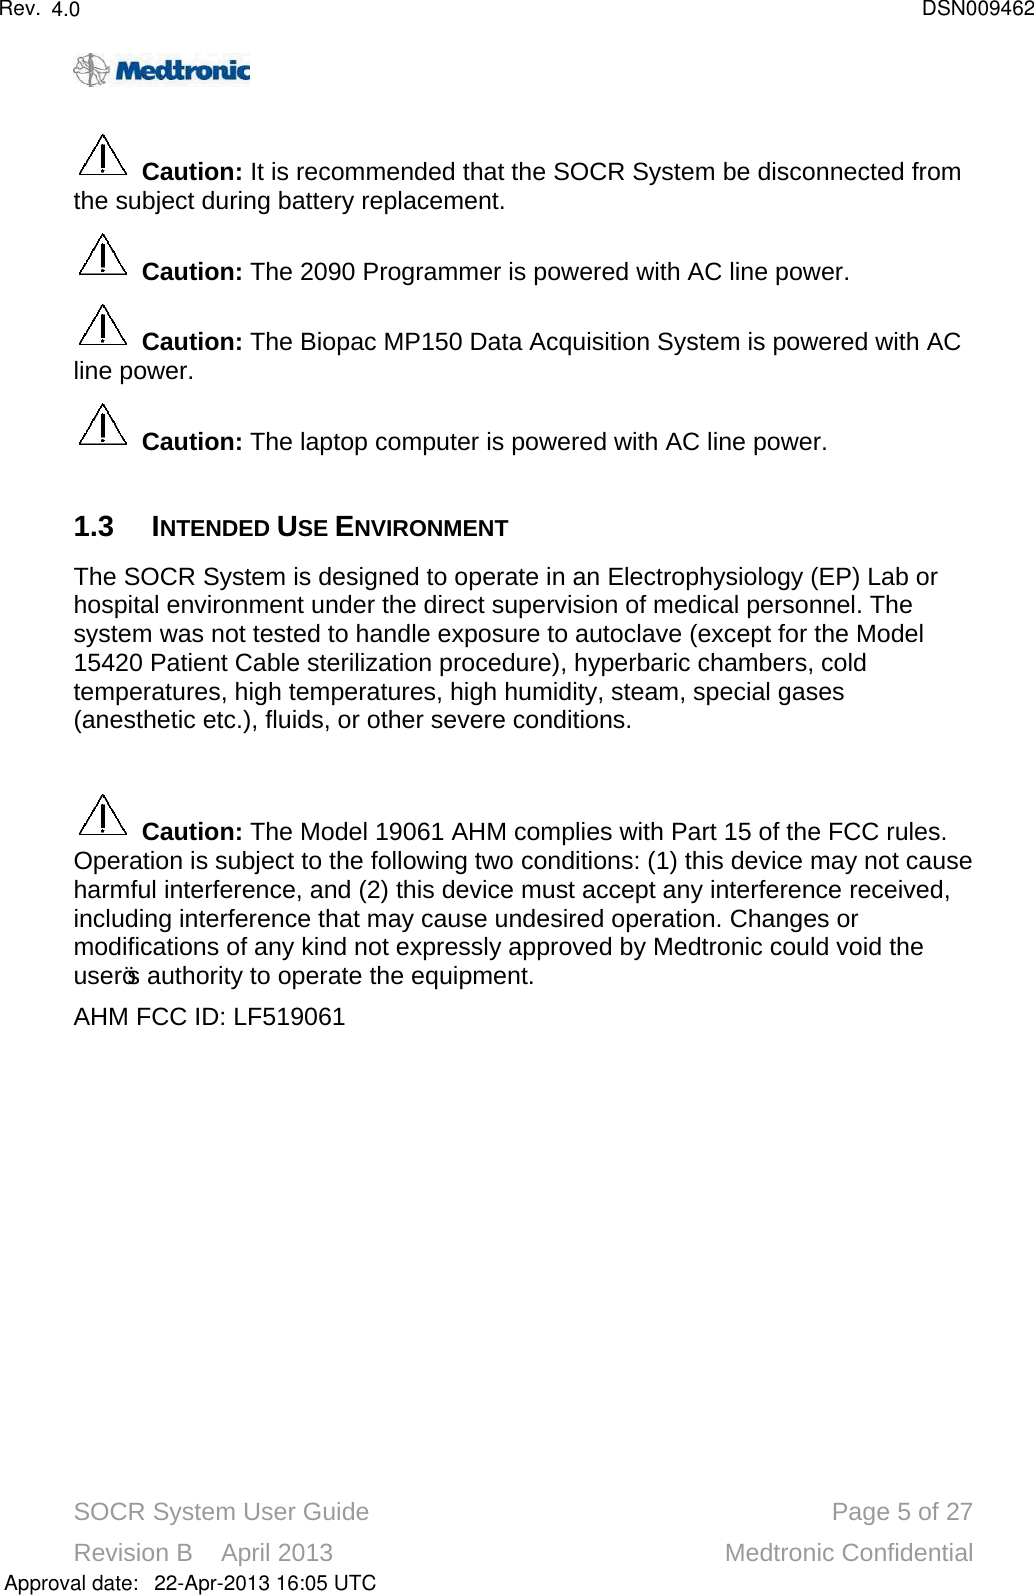 SOCR System User Guide Page 5of 27Revision B    April 2013 Medtronic ConfidentialCaution: It is recommended that the SOCR System be disconnected from the subject during battery replacement.Caution: The 2090 Programmer is powered with AC line power.Caution: The Biopac MP150 Data Acquisition System is powered with AC line power.Caution: The laptop computer is powered with AC line power.1.3 INTENDED USE ENVIRONMENTThe SOCR System is designed to operate in an Electrophysiology (EP) Lab or hospital environment under the direct supervision of medical personnel. The system was not tested to handle exposure to autoclave (except for the Model 15420 Patient Cable sterilization procedure), hyperbaric chambers, cold temperatures, high temperatures, high humidity, steam, special gases (anesthetic etc.), fluids, or other severe conditions.Caution:The Model 19061 AHM complies with Part 15 of the FCC rules. Operation is subject to the following two conditions: (1) this device may not cause harmful interference, and (2) this device must accept any interference received, including interference that may cause undesired operation. Changes or modifications of any kind not expressly approved by Medtronic could void the user’s authority to operate the equipment. AHM FCC ID: LF519061Approval date:4.0 DSN00946222-Apr-2013 16:05 UTCRev.